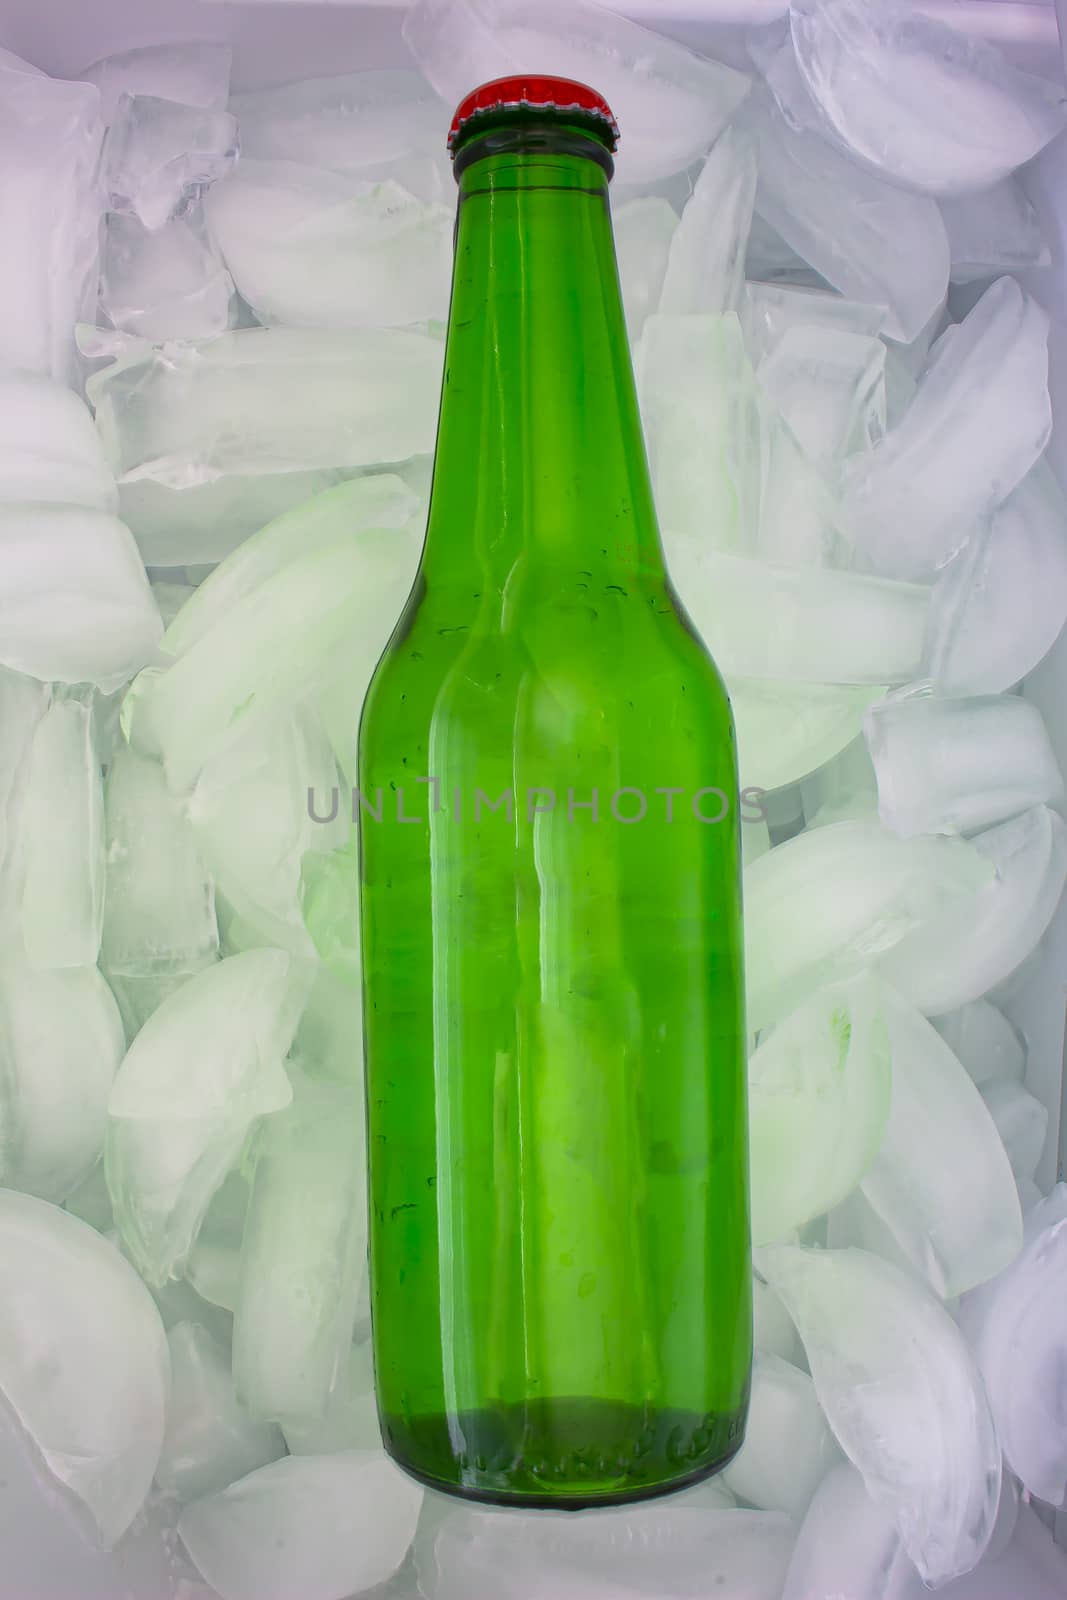 A generic green beer bottle on ice